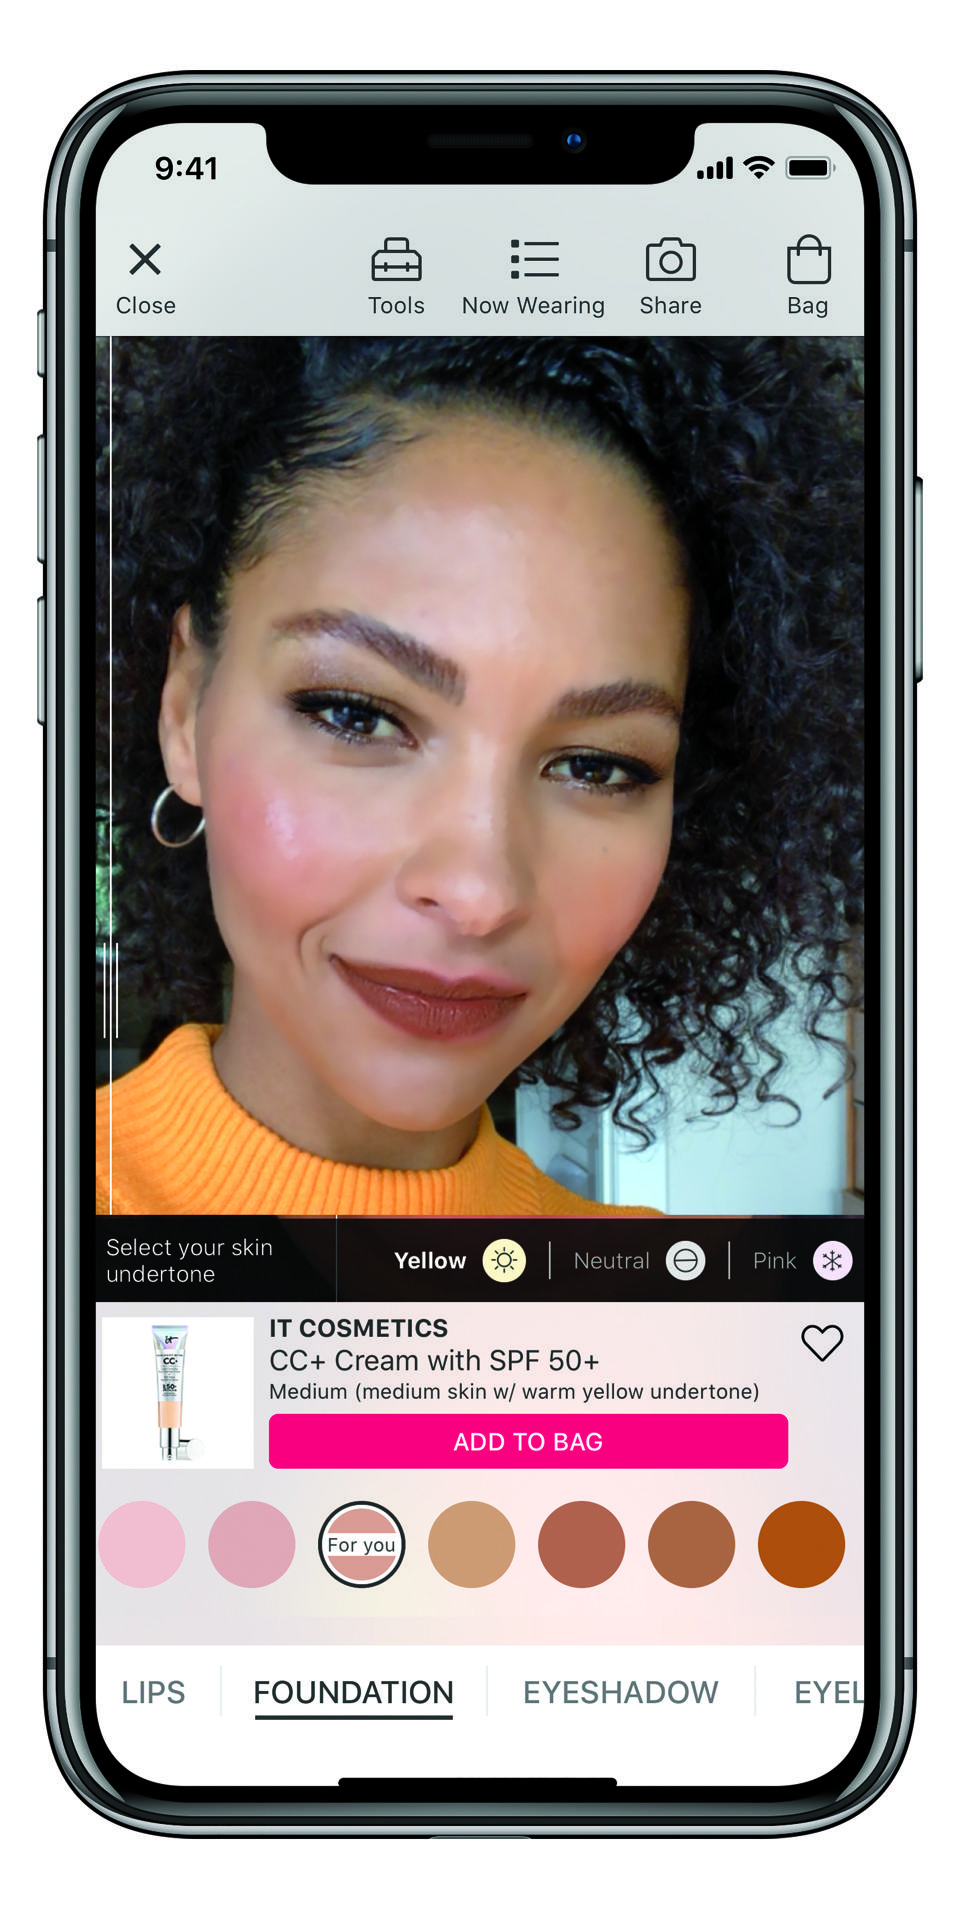 Ulta Beauty's GlamLab offers a state-of-the-art virtual makeup try-on experience.